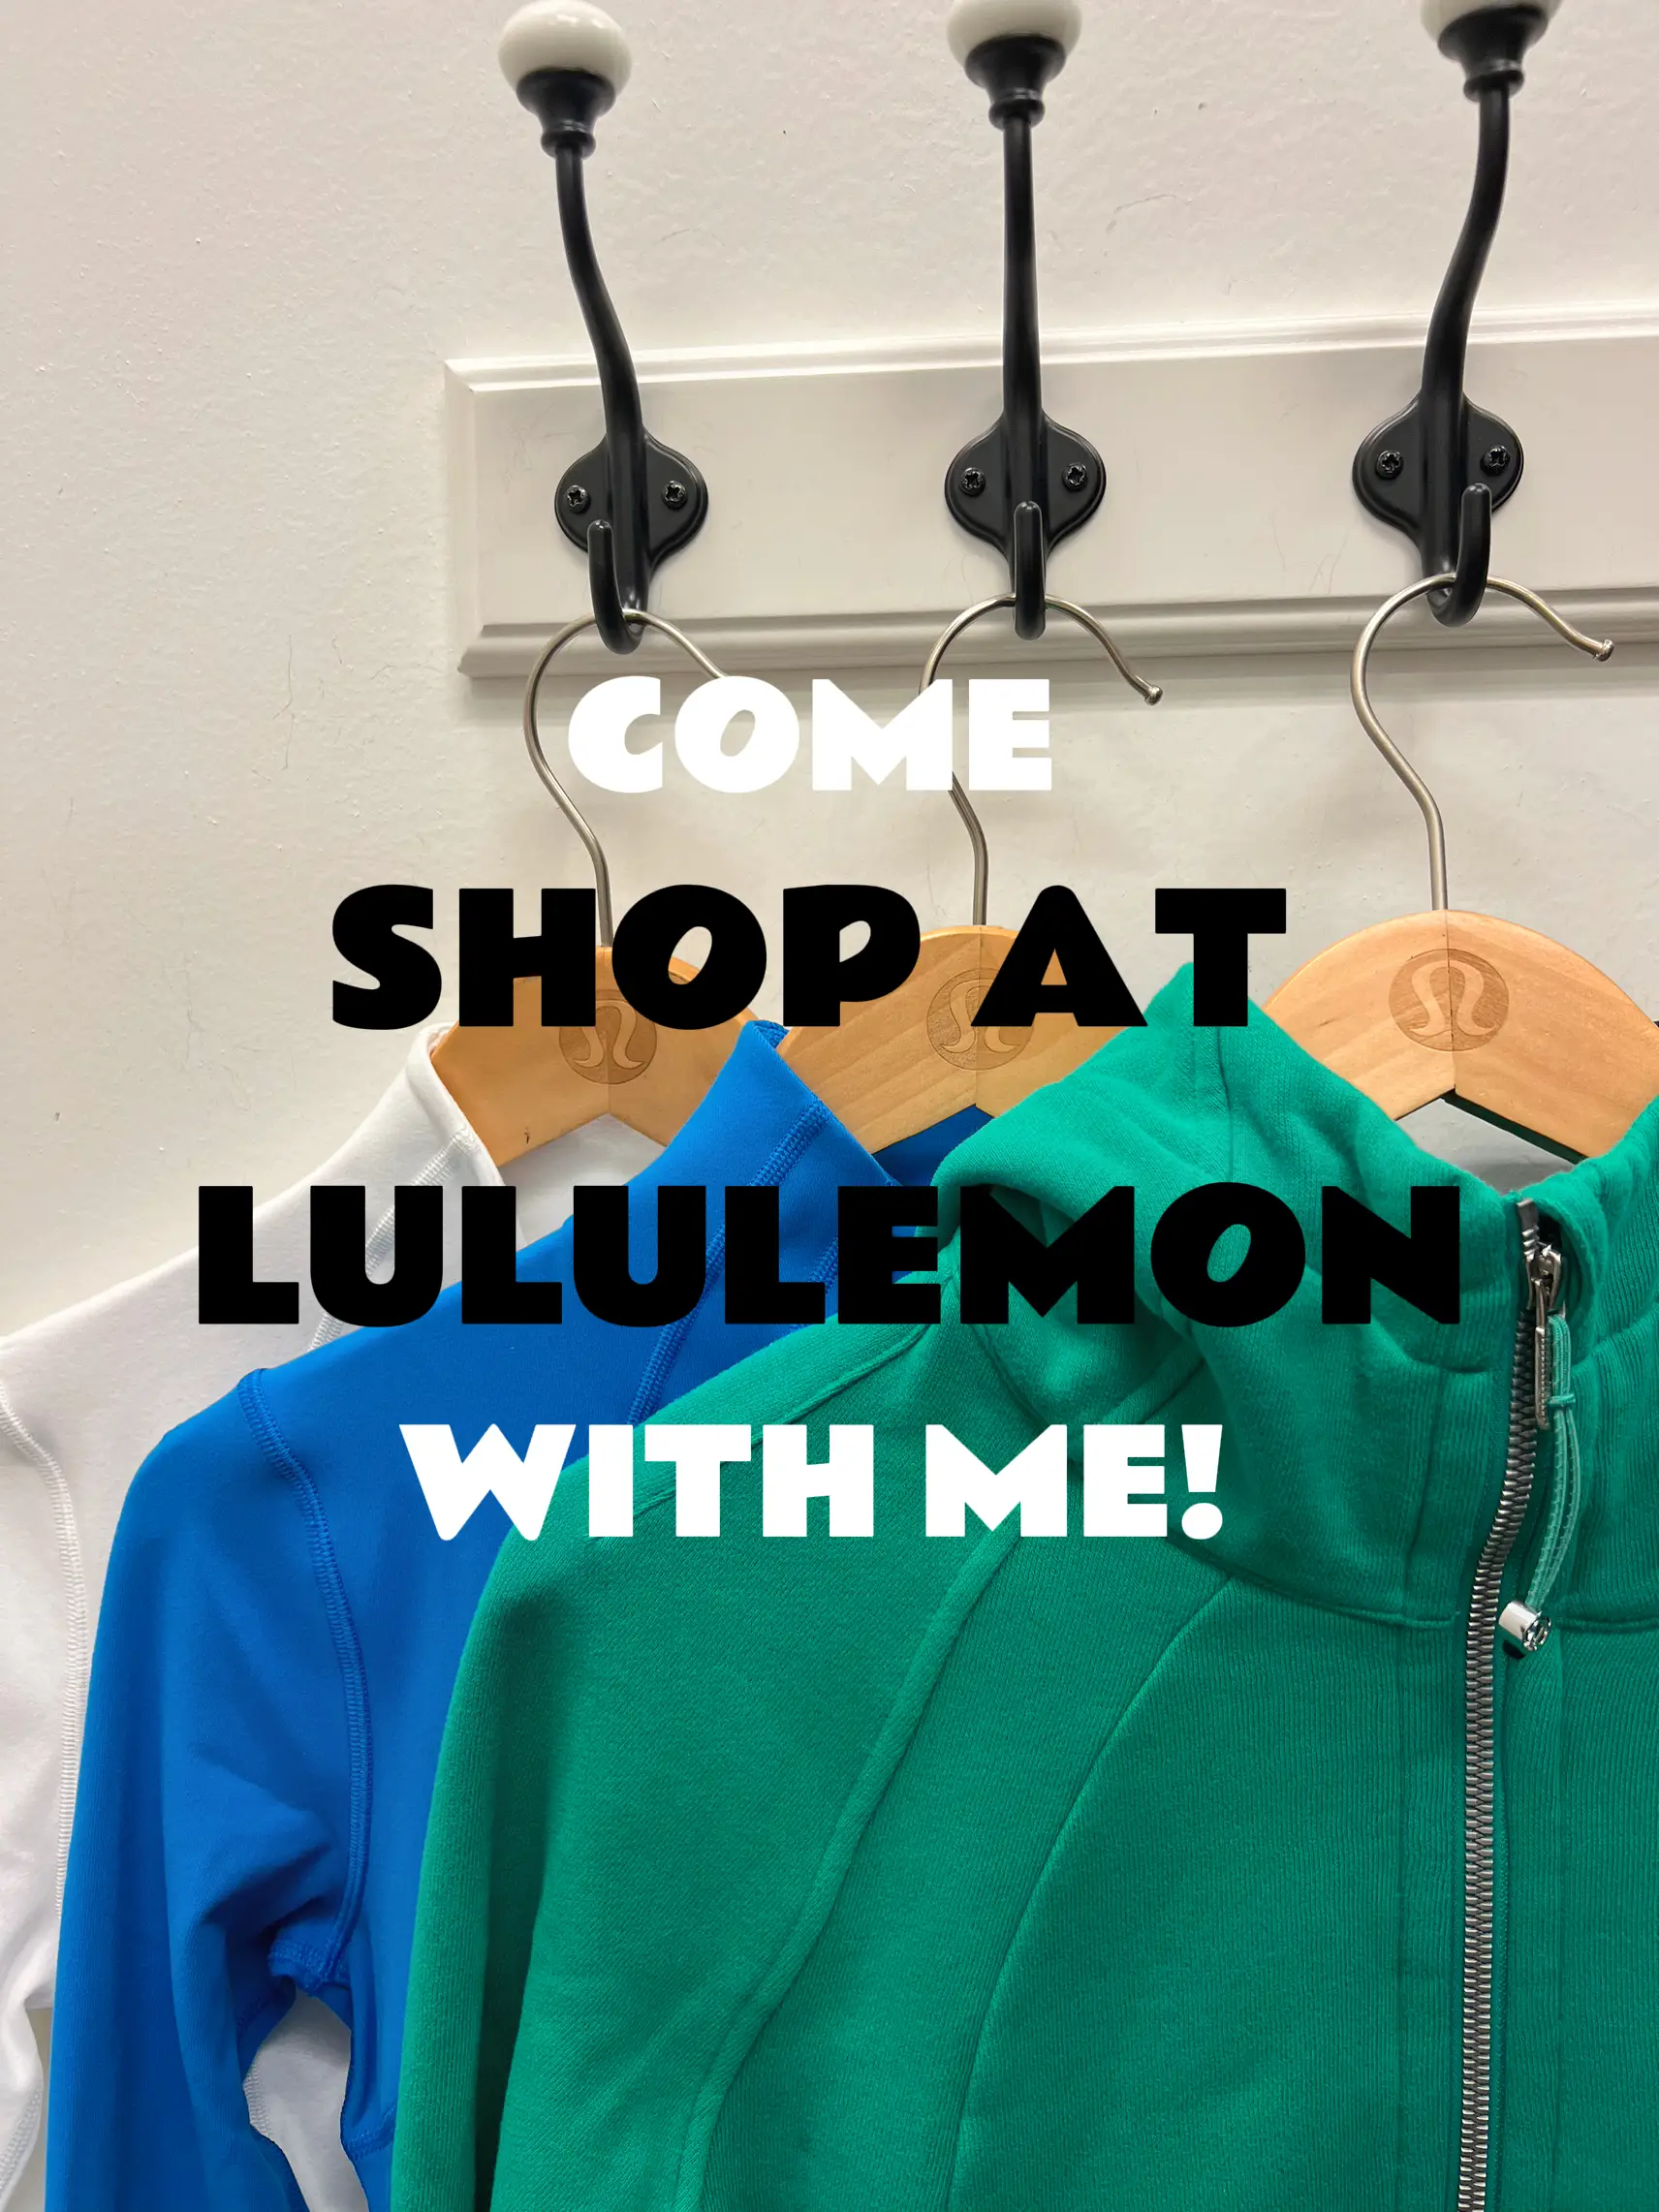 Come shop with me at lululemon, Gallery posted by Robyn